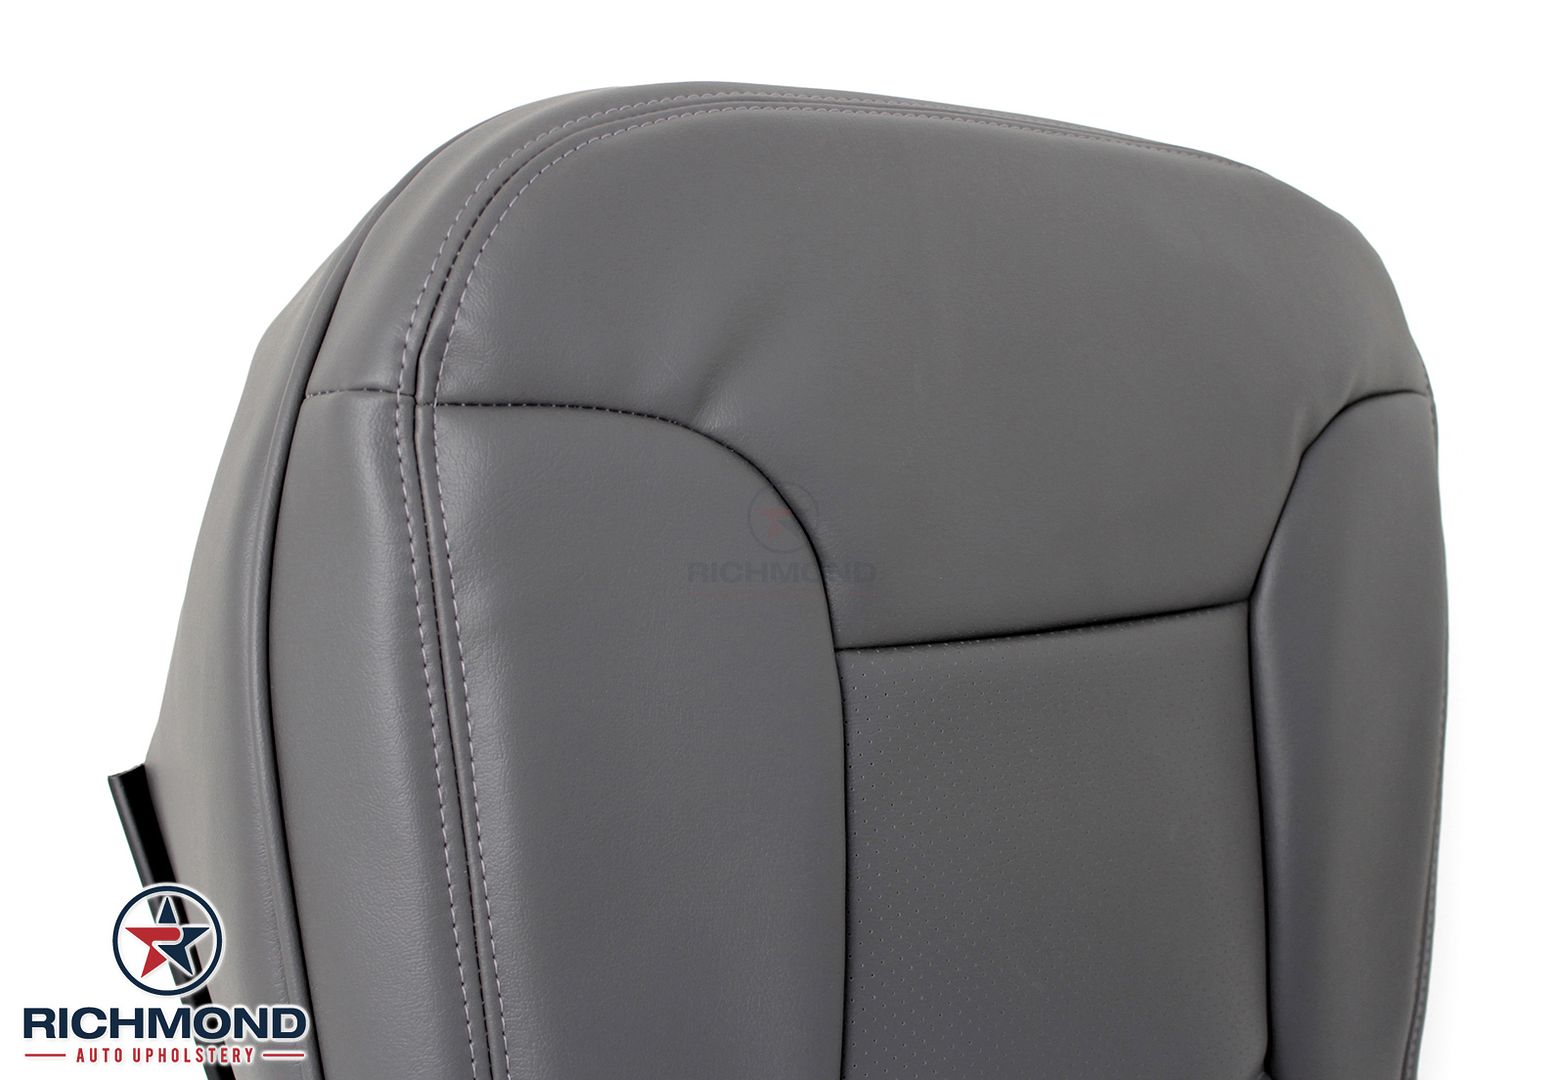  photo 1992-1993-1994-1995-1996-Ford-Bronco-Driver-Side-Bottom-Leather-Seat-Cover-Dk-Dark-Graphite-8_zpsixqz8tiw.jpg